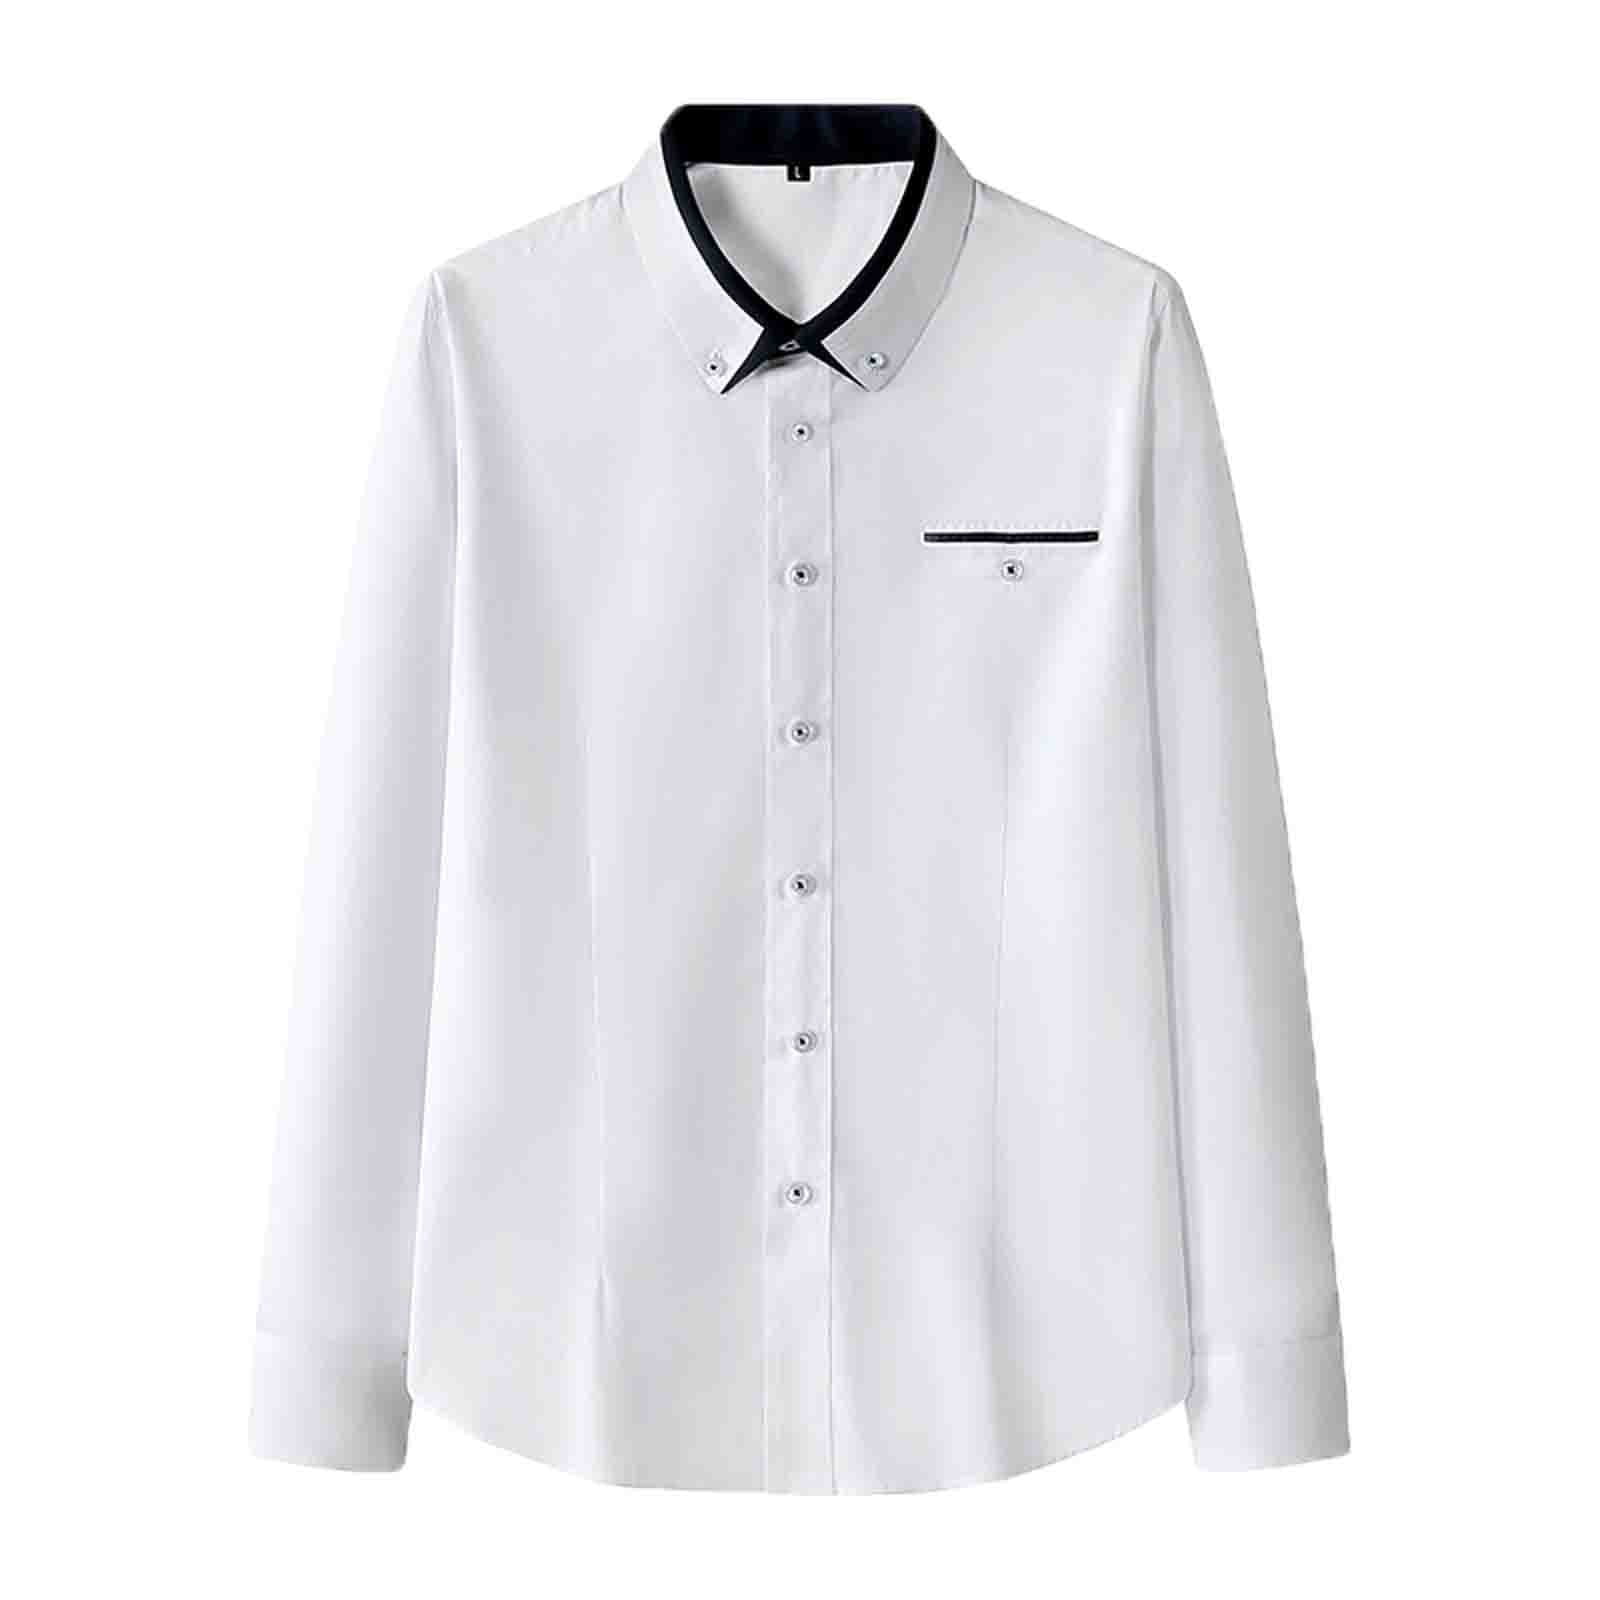 TAIAOJING Men's Dress Shirts Autumn Single Breasted Casual Beach Long Sleeve Vacation Outdoor Holiday Homme Blouse Shirt - Walmart.com